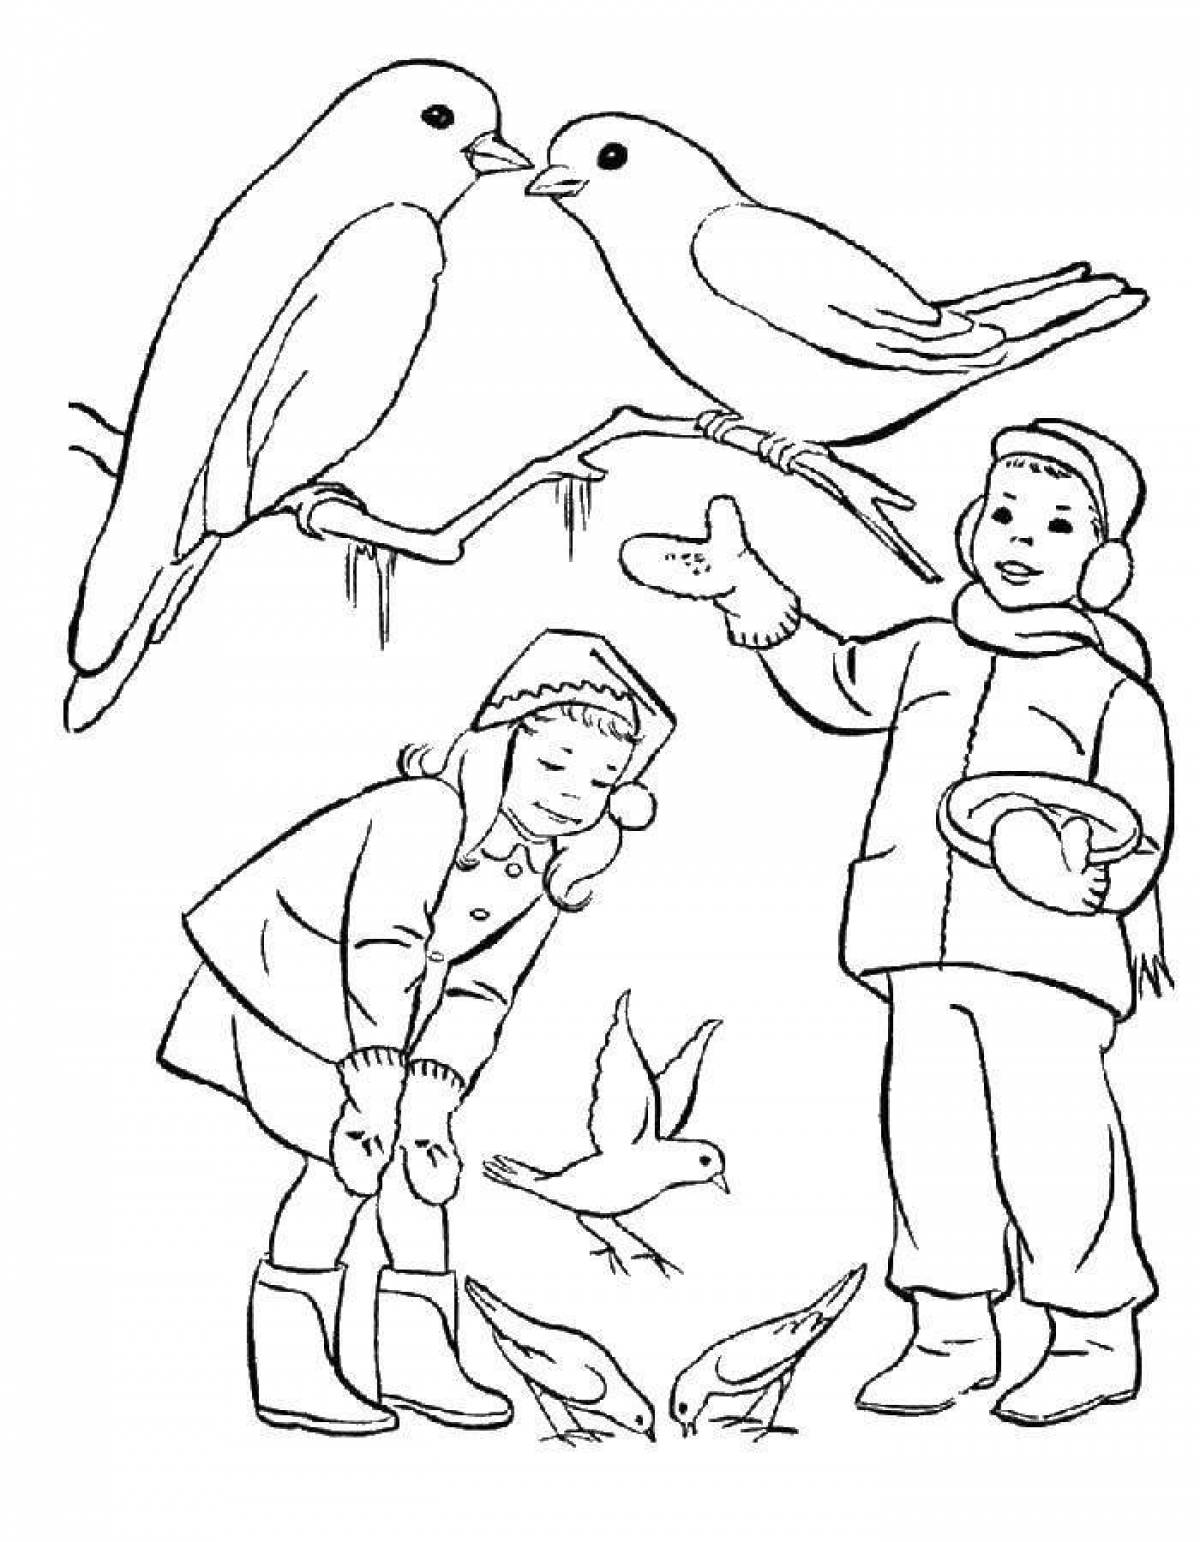 Crying winter birds coloring page